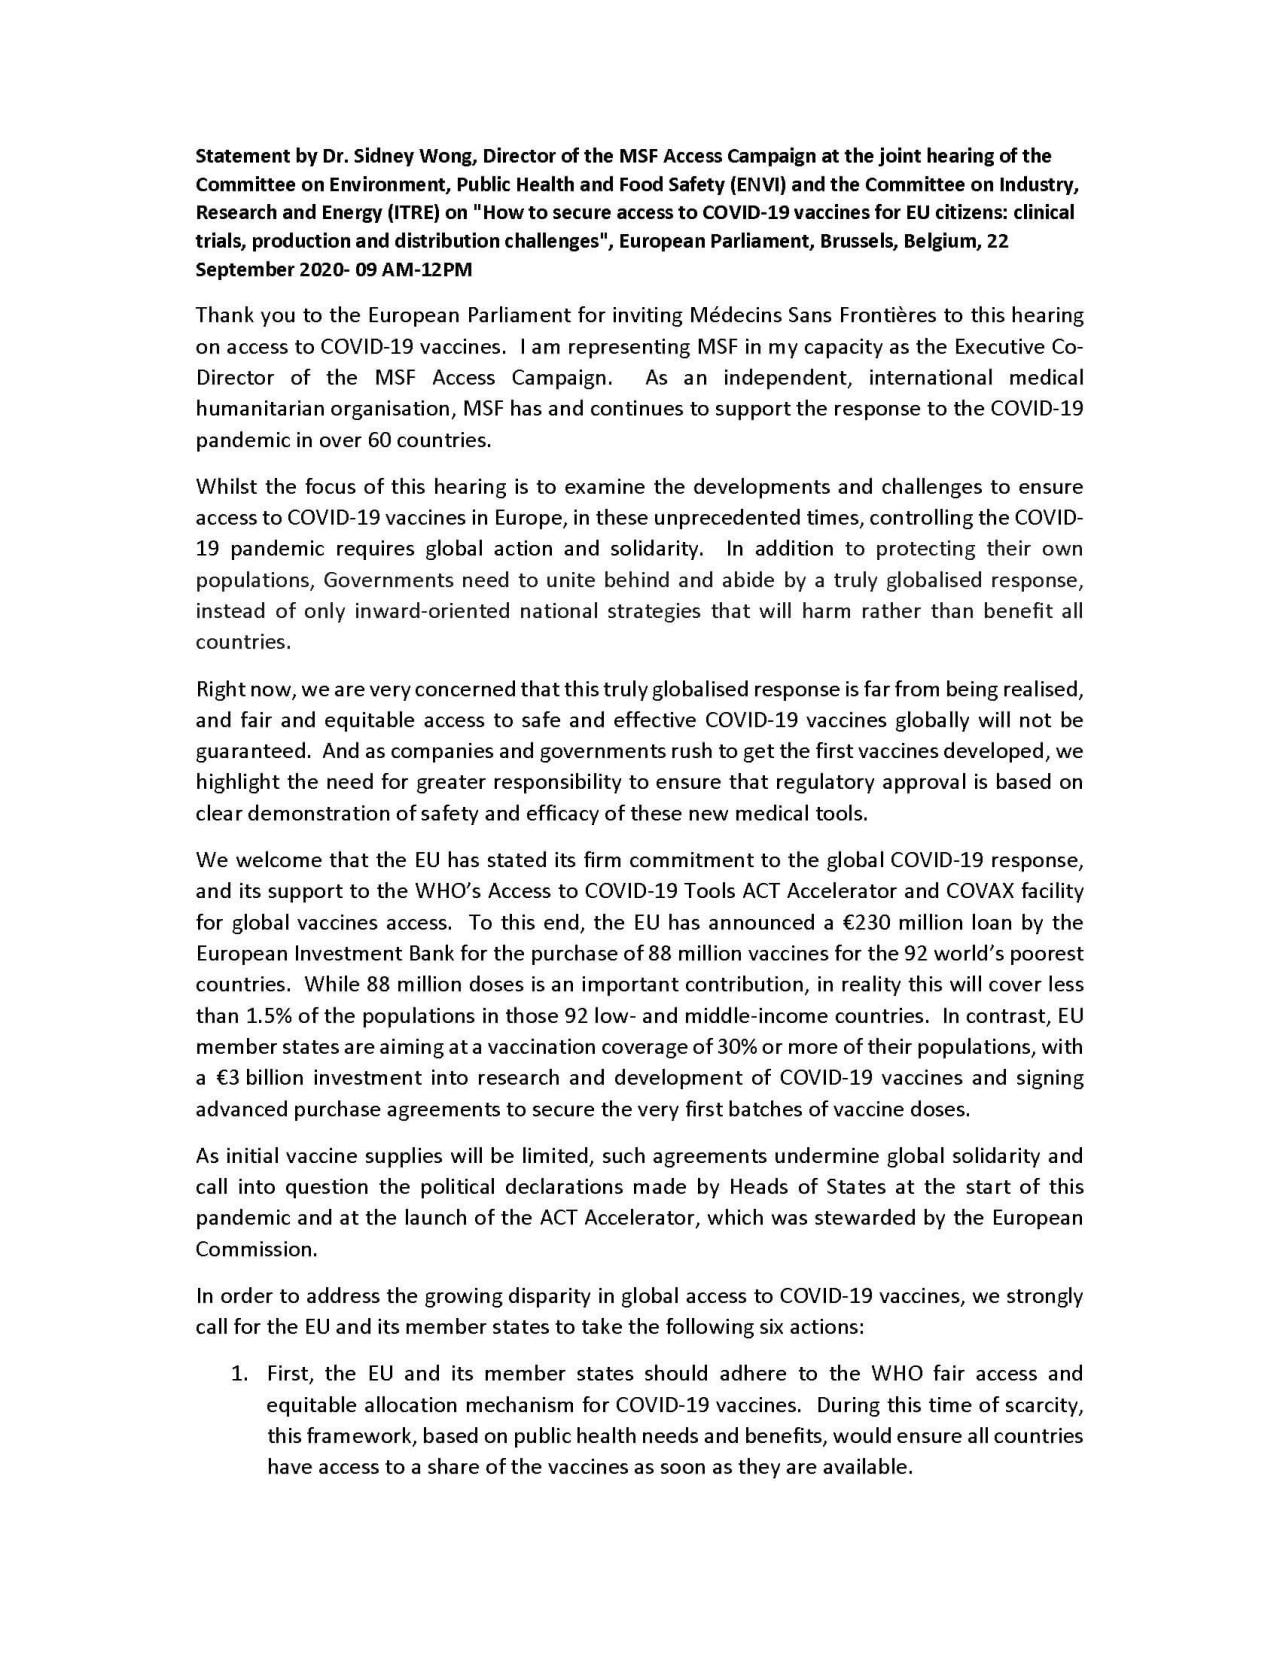 msf_ac_statement_hearing_covid_vaccines_ep_220920_page_1